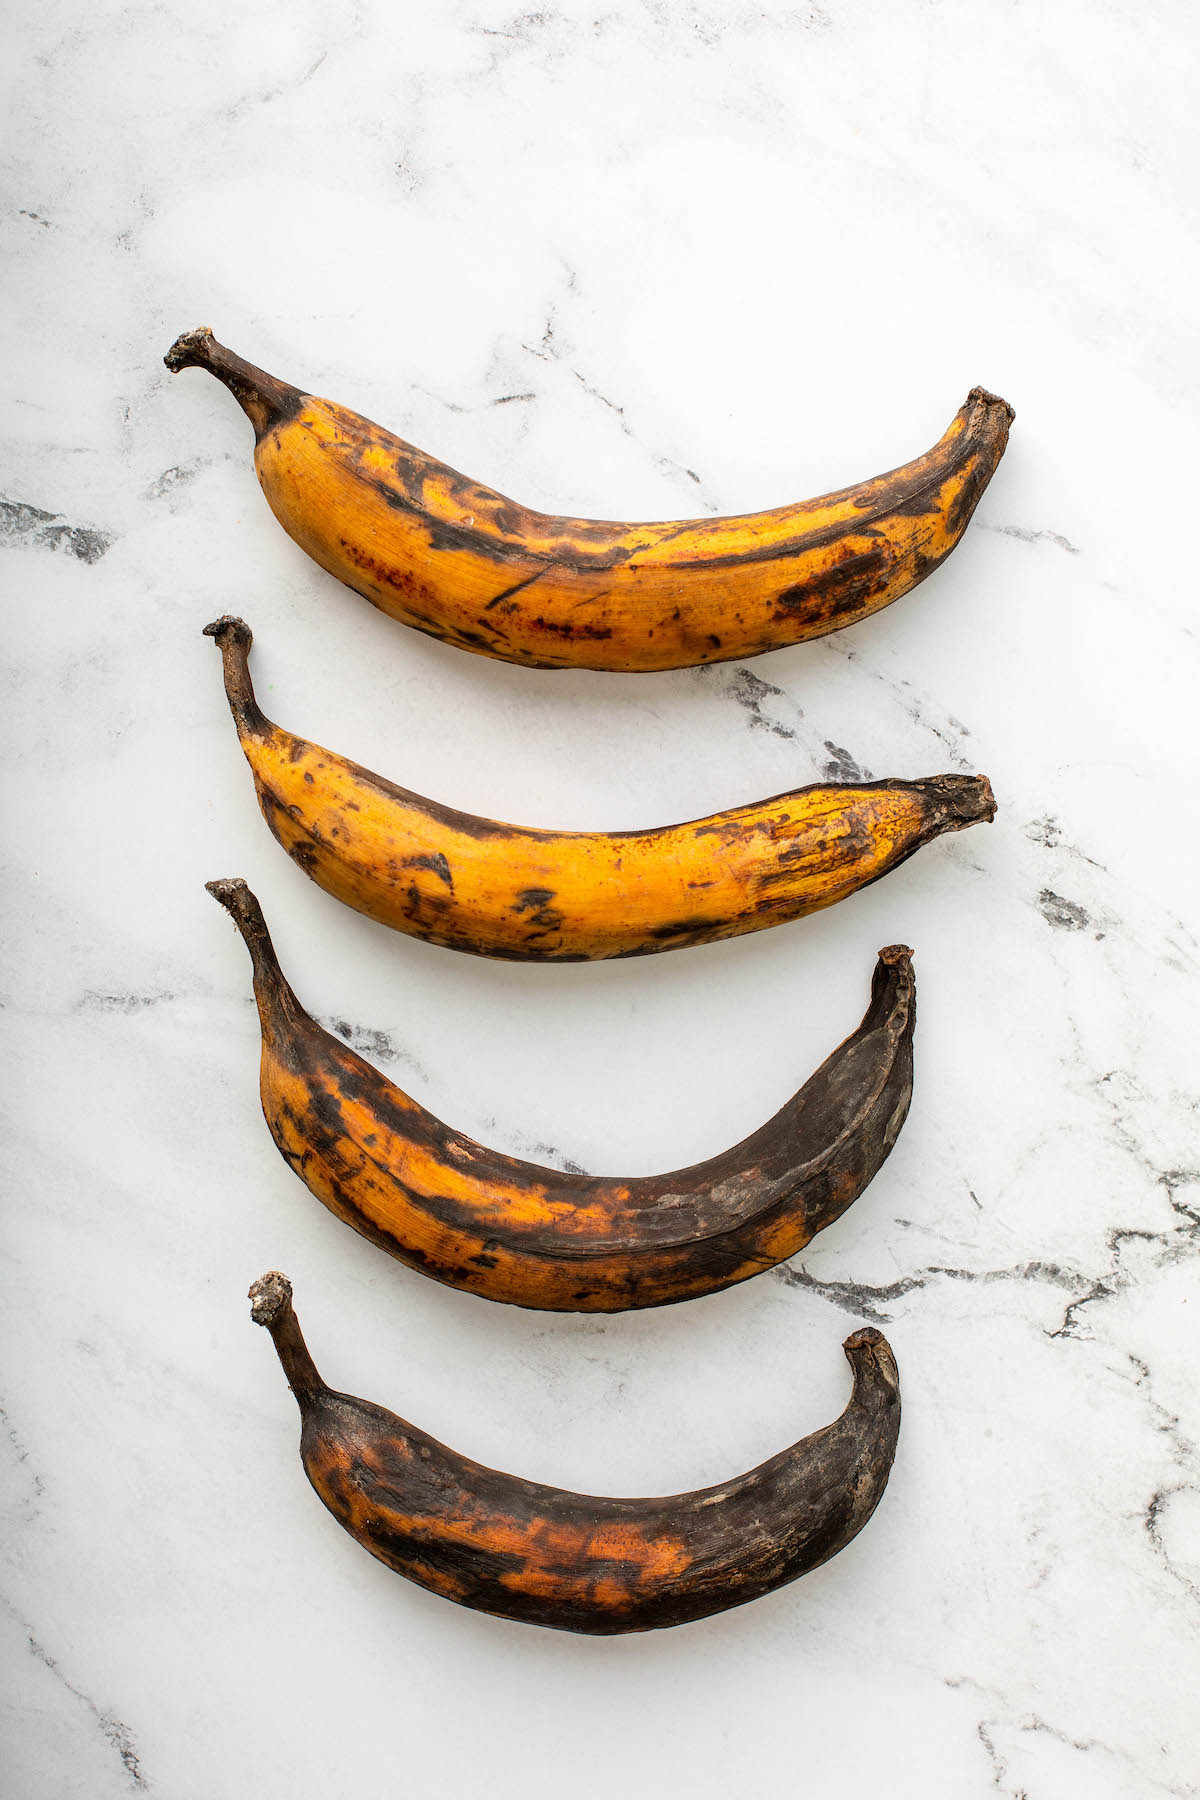 Plantains in varying degrees of ripeness.